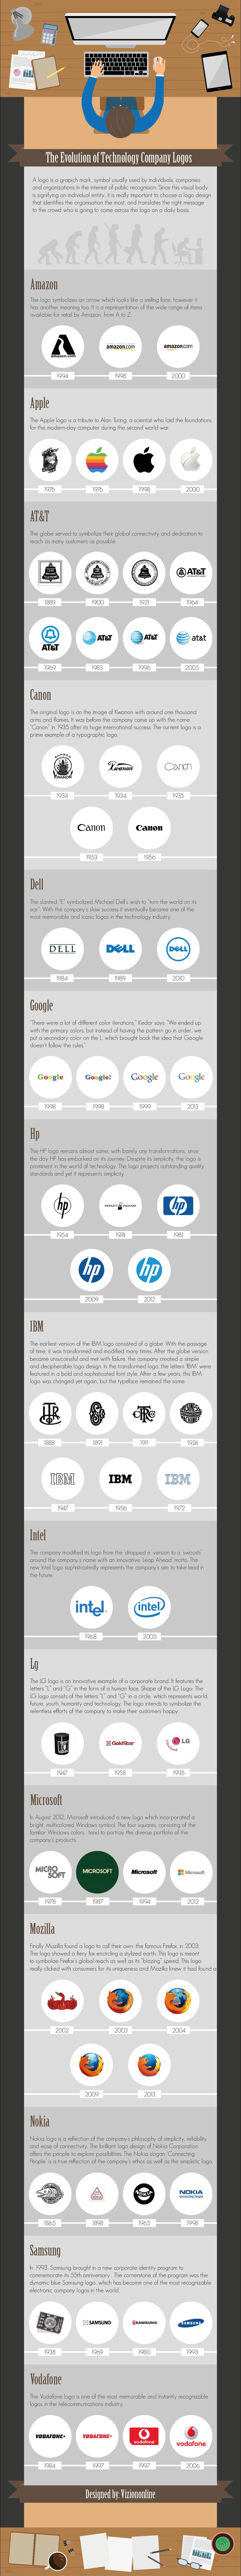 The Evolution of Technology Company Logos - Infographic